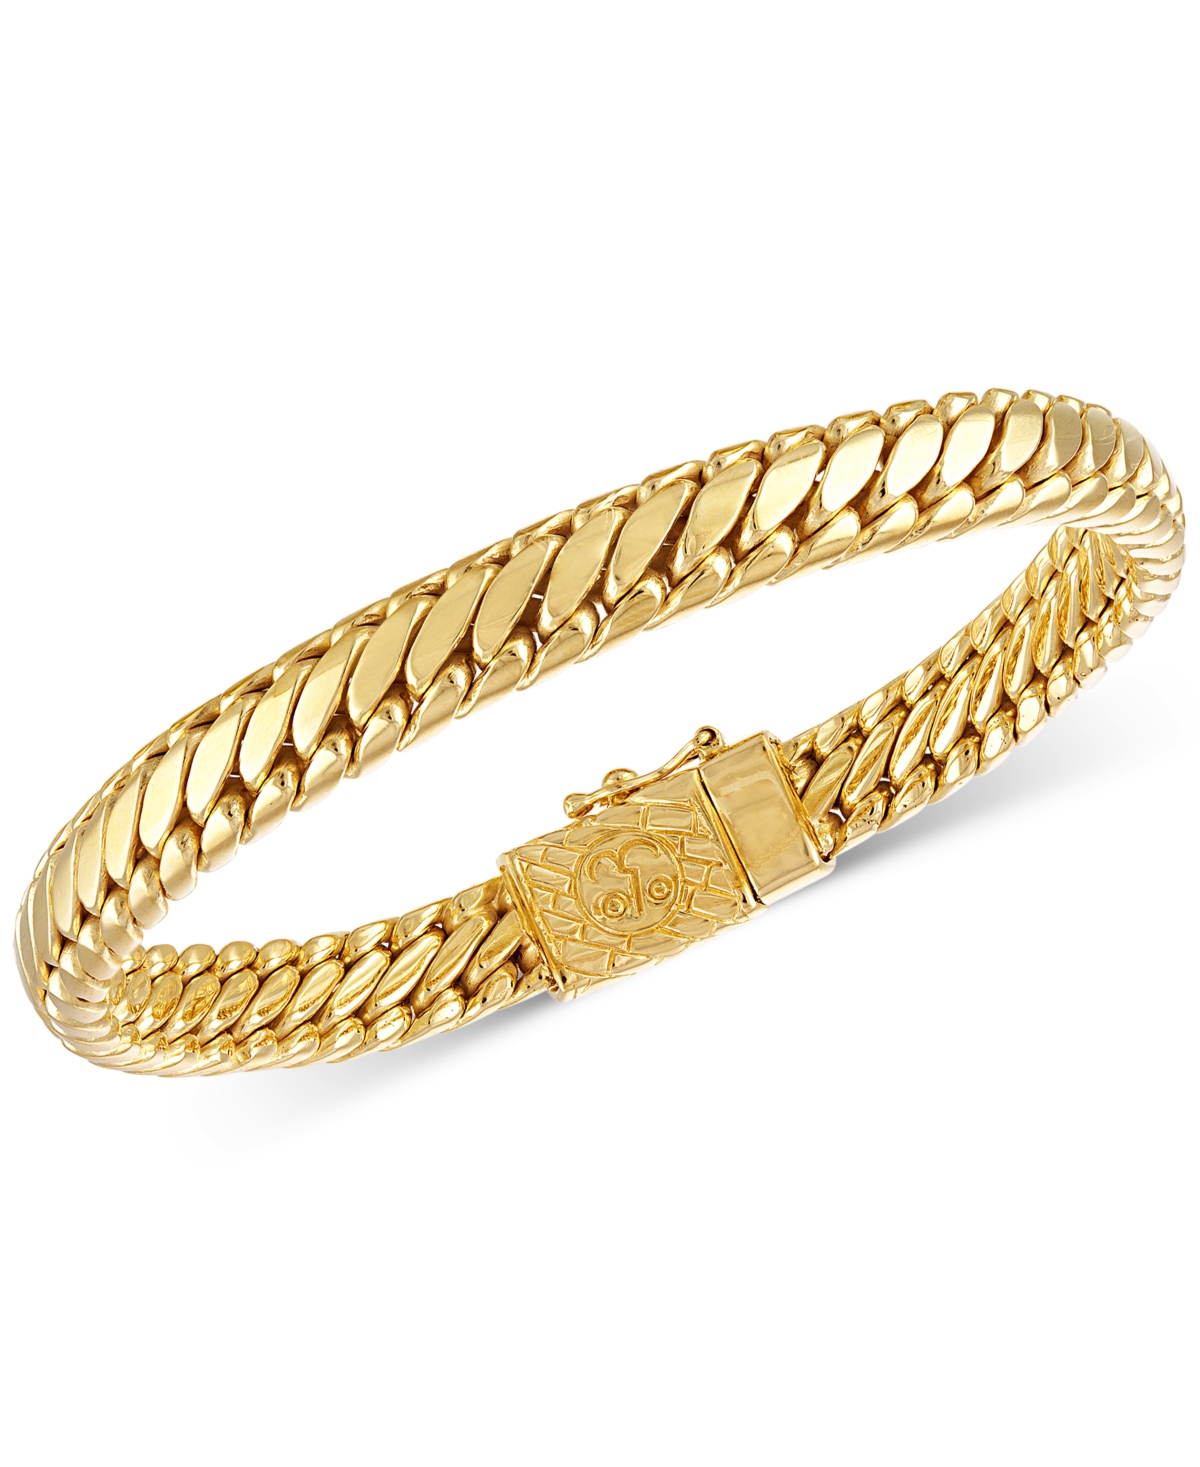 Heavy Serpentine Link Bracelet in 14k Gold-Plated Silver, Created for Macy's - k Gold Over Silver